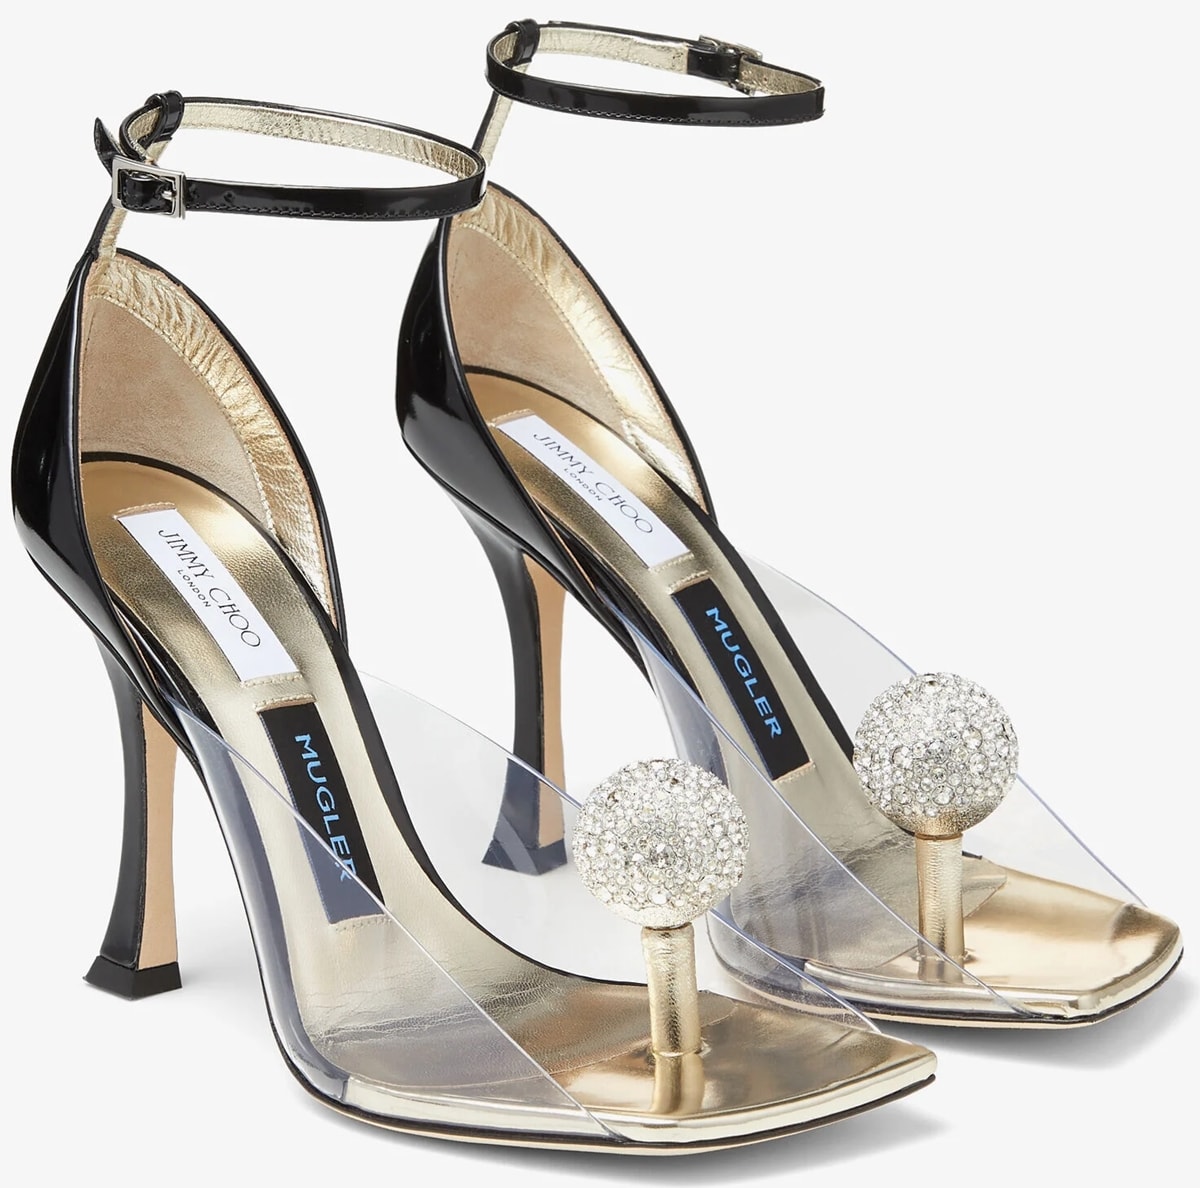 The toe post of this elegant sandal is adorned with a sparkling crystal ball that offers the illusion of hovering over the foot